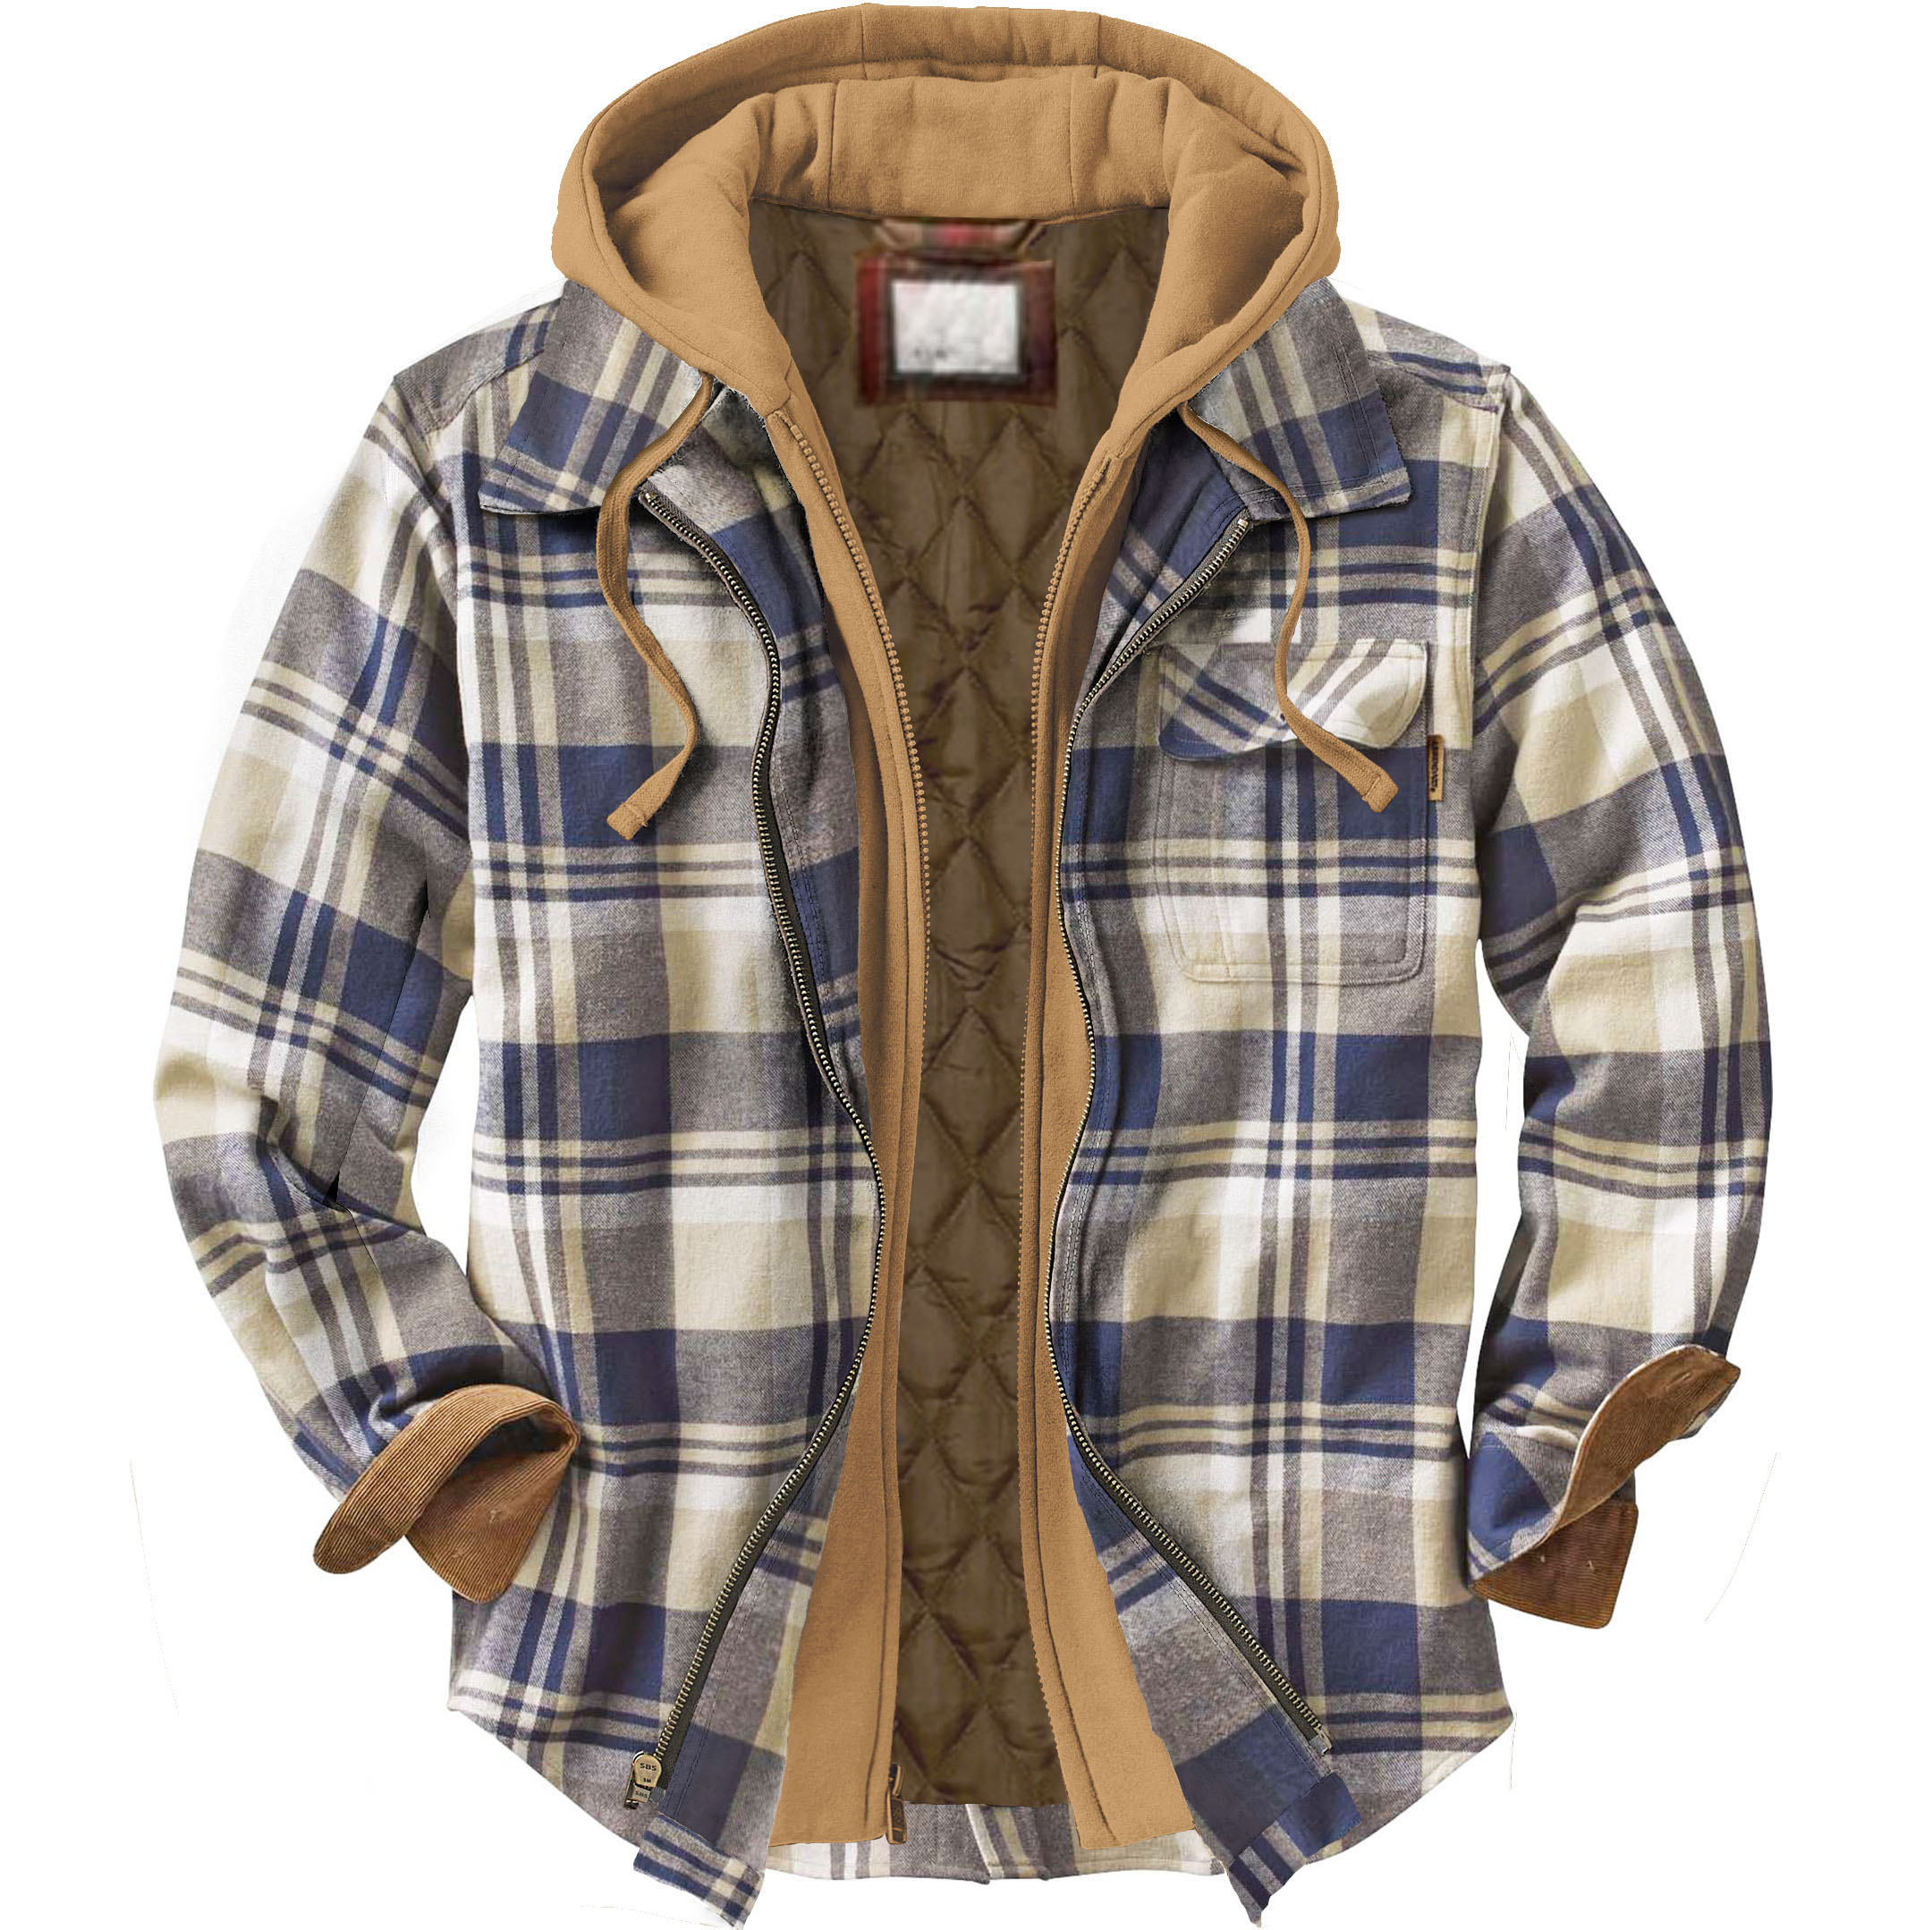 Men's Autumn & Winter Chic Outdoor Casual Checked Hooded Jacket